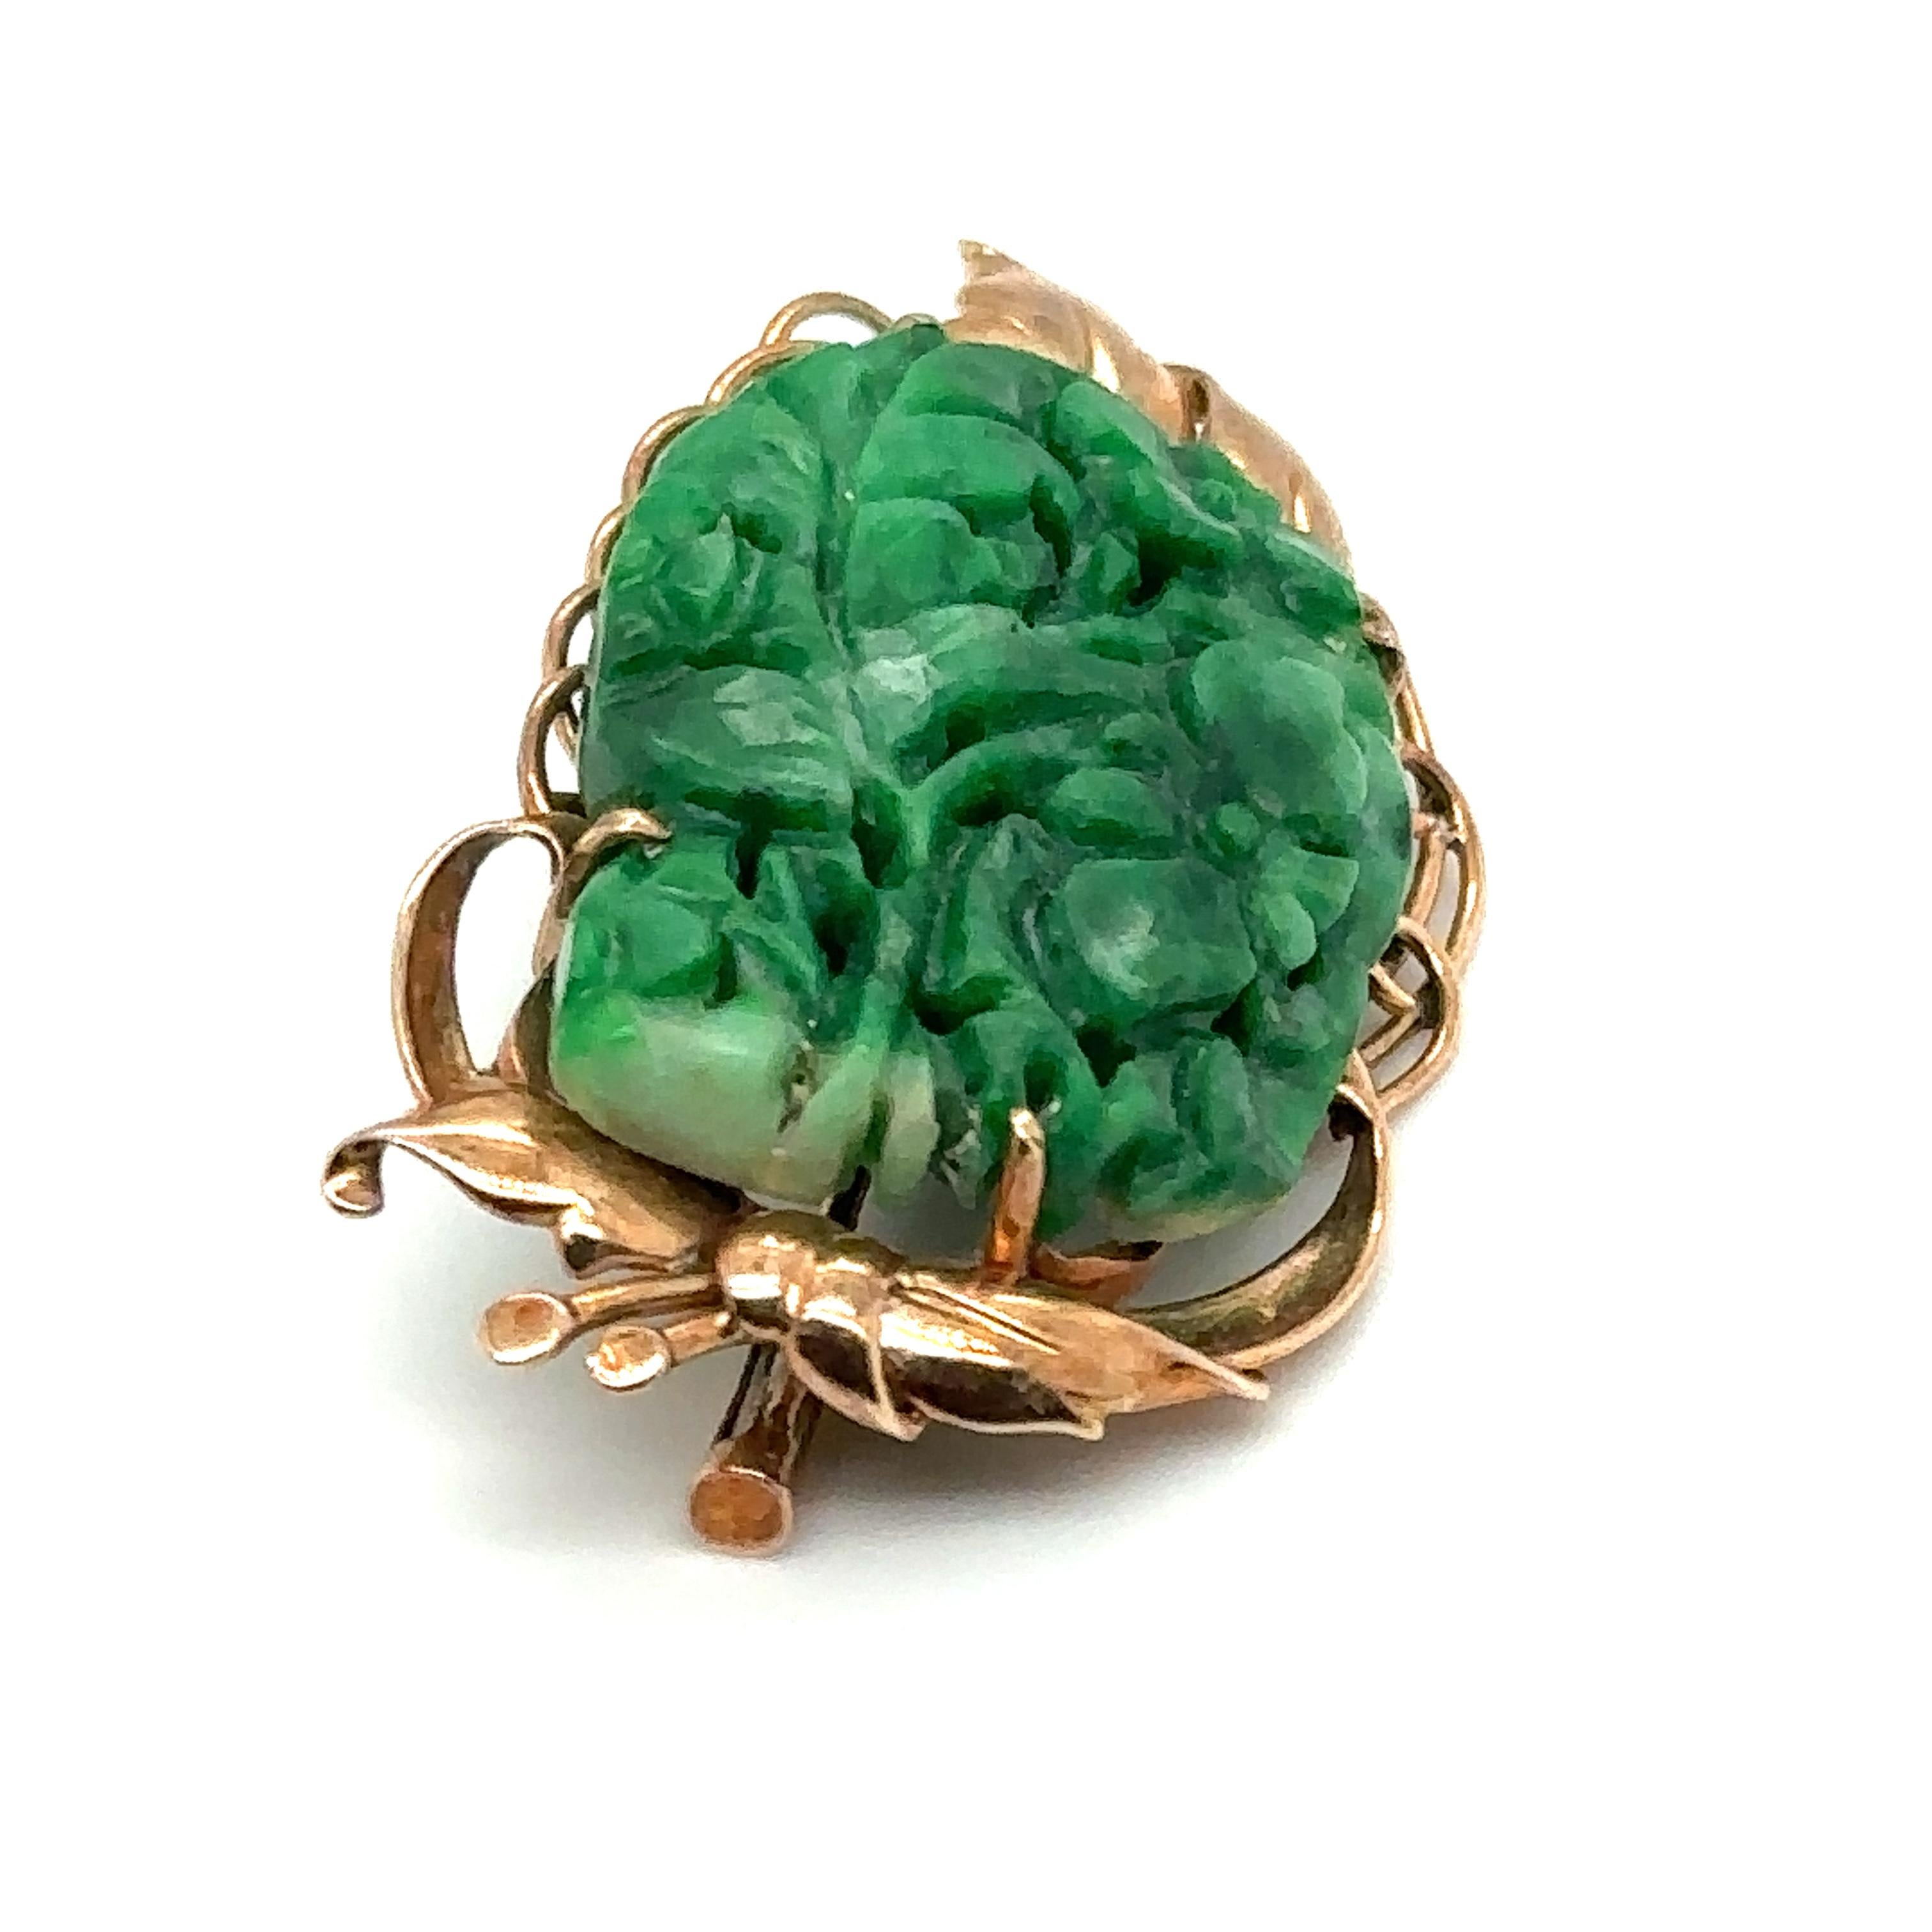 1890s Victorian Carved Green Jade Brooch with Leaf Design in 14 Karat Gold In Excellent Condition For Sale In Atlanta, GA